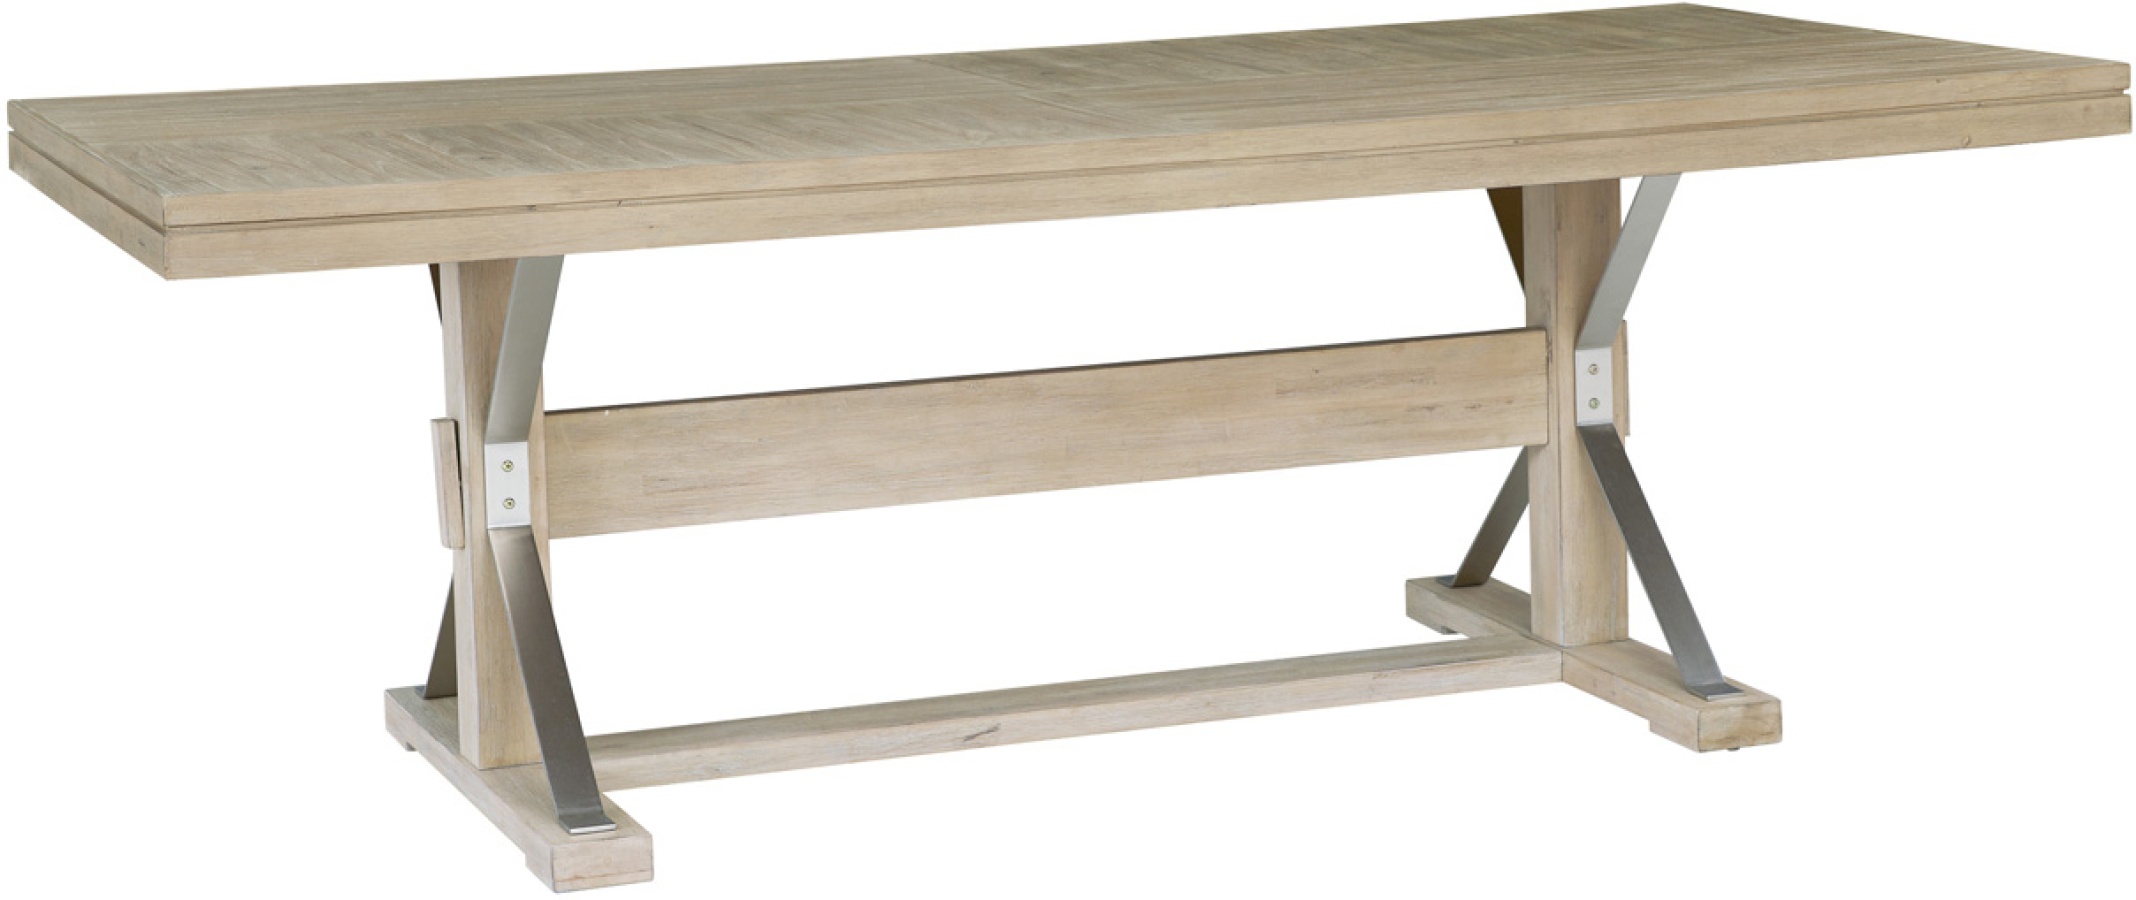 Maddox Trestle Dining Table